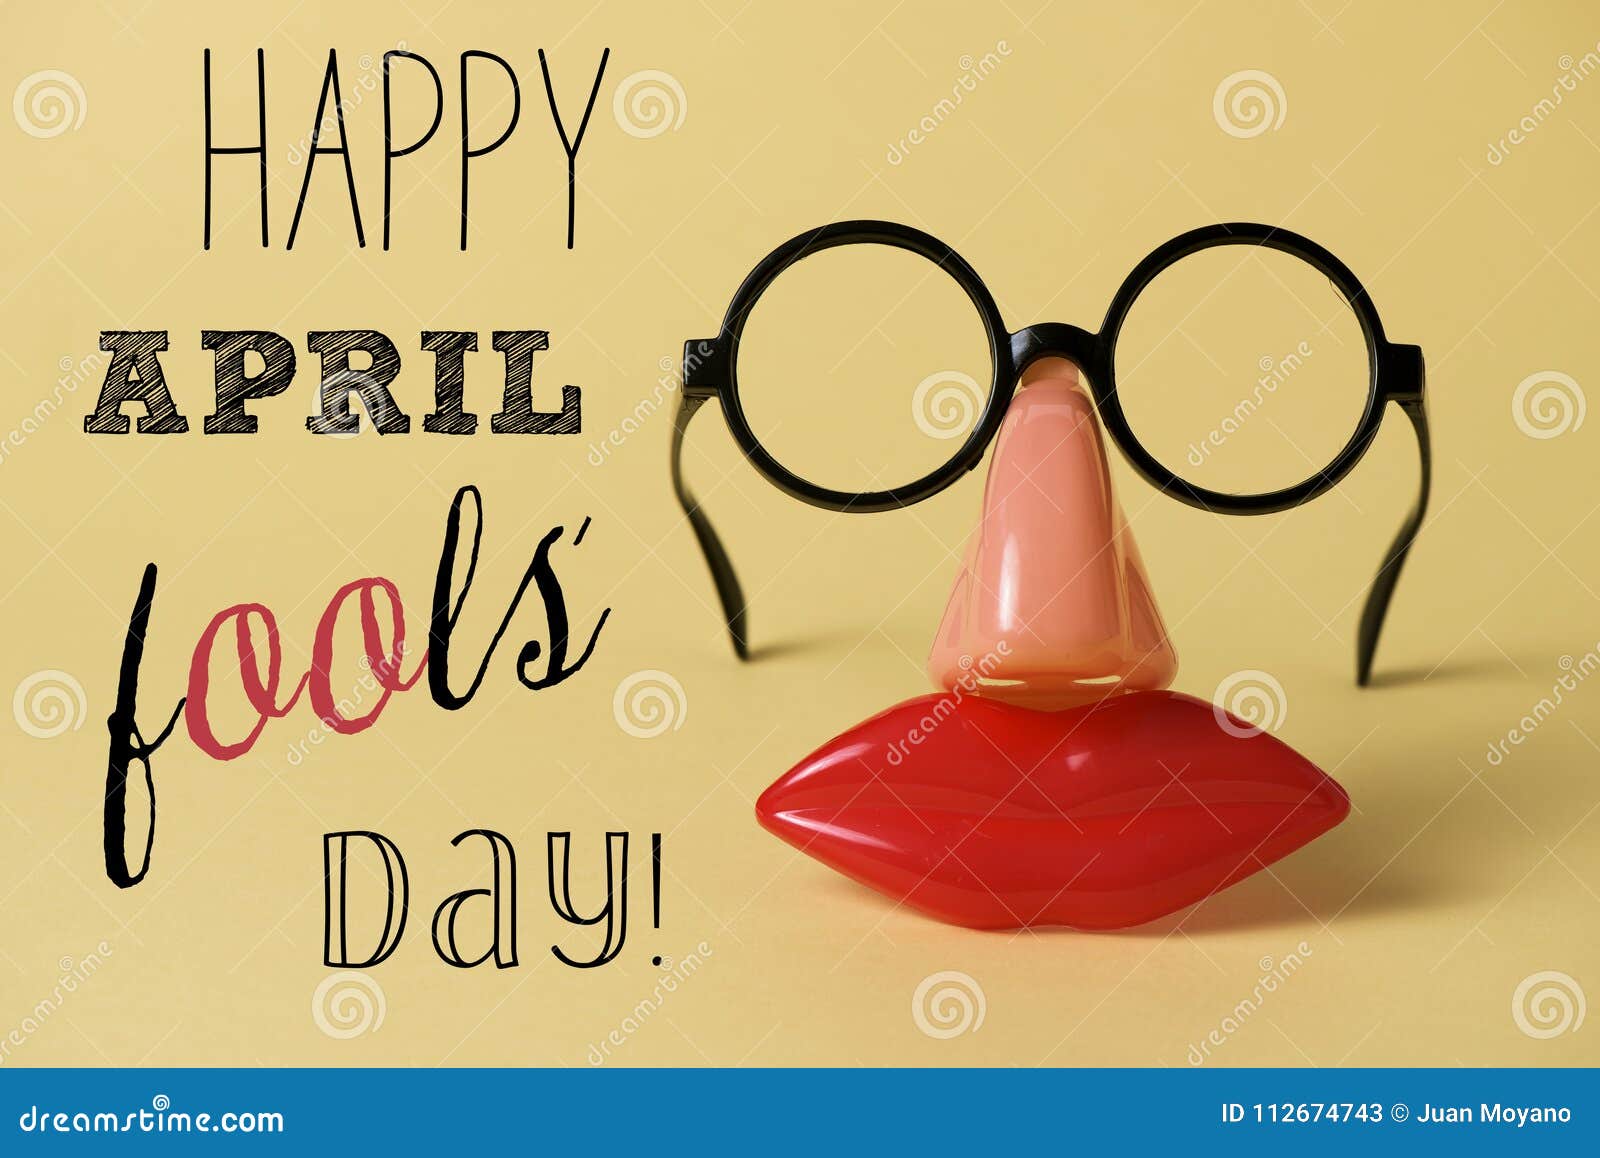 novelty glasses and text happy april fools day